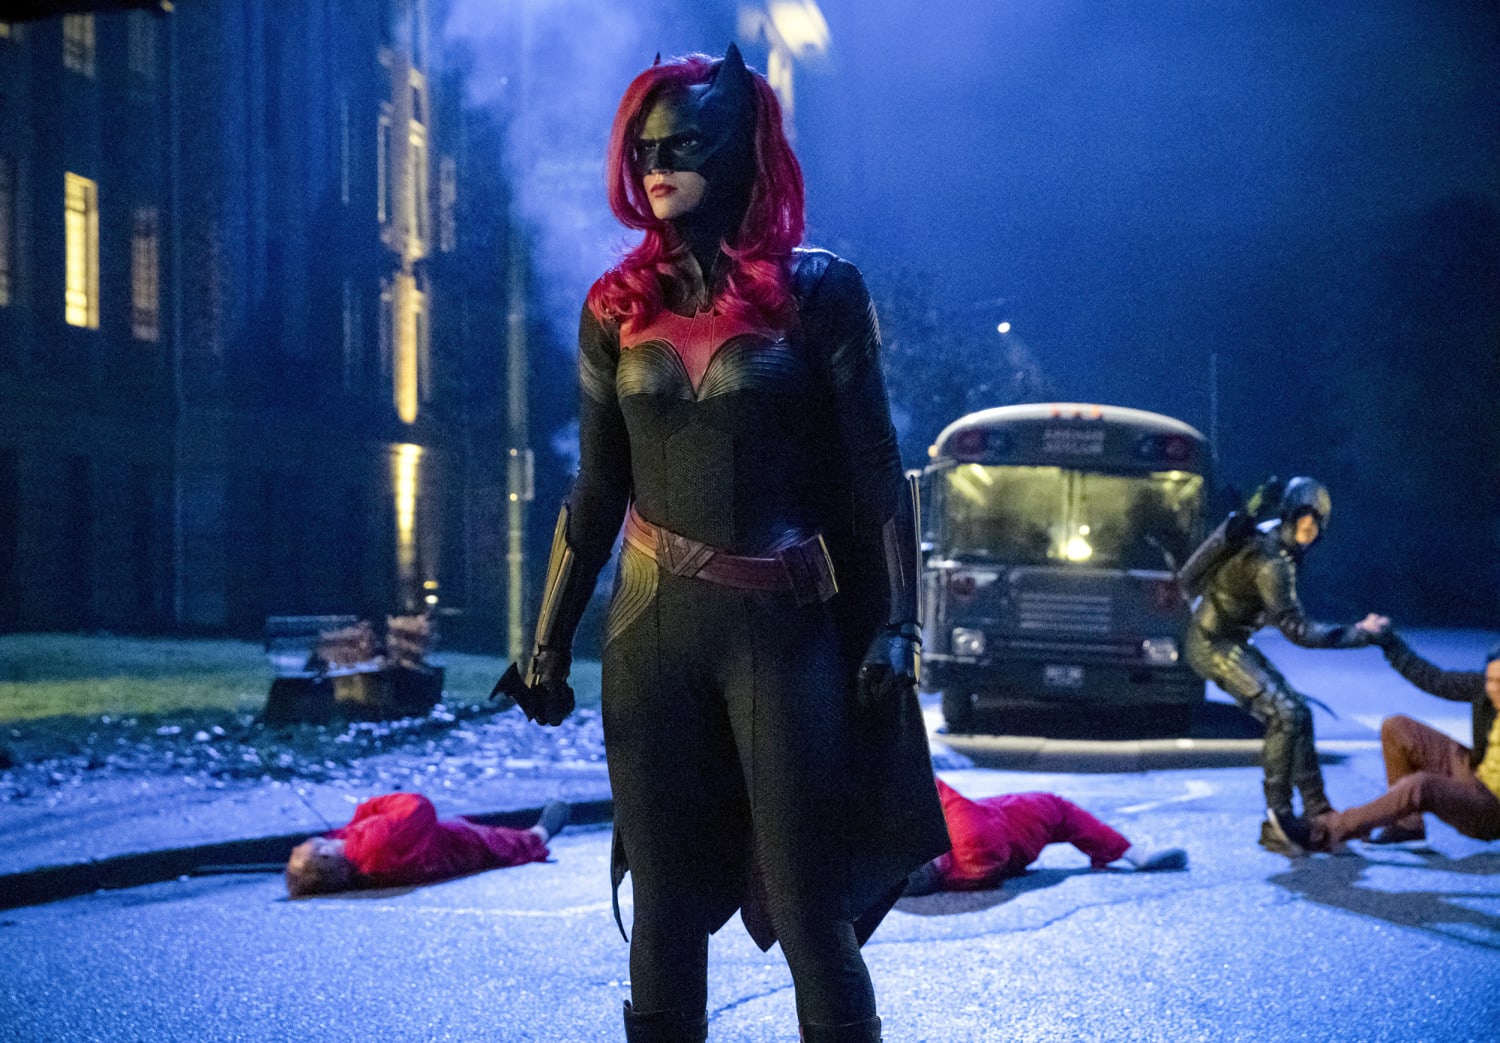 When does the next episode air for Batwoman?